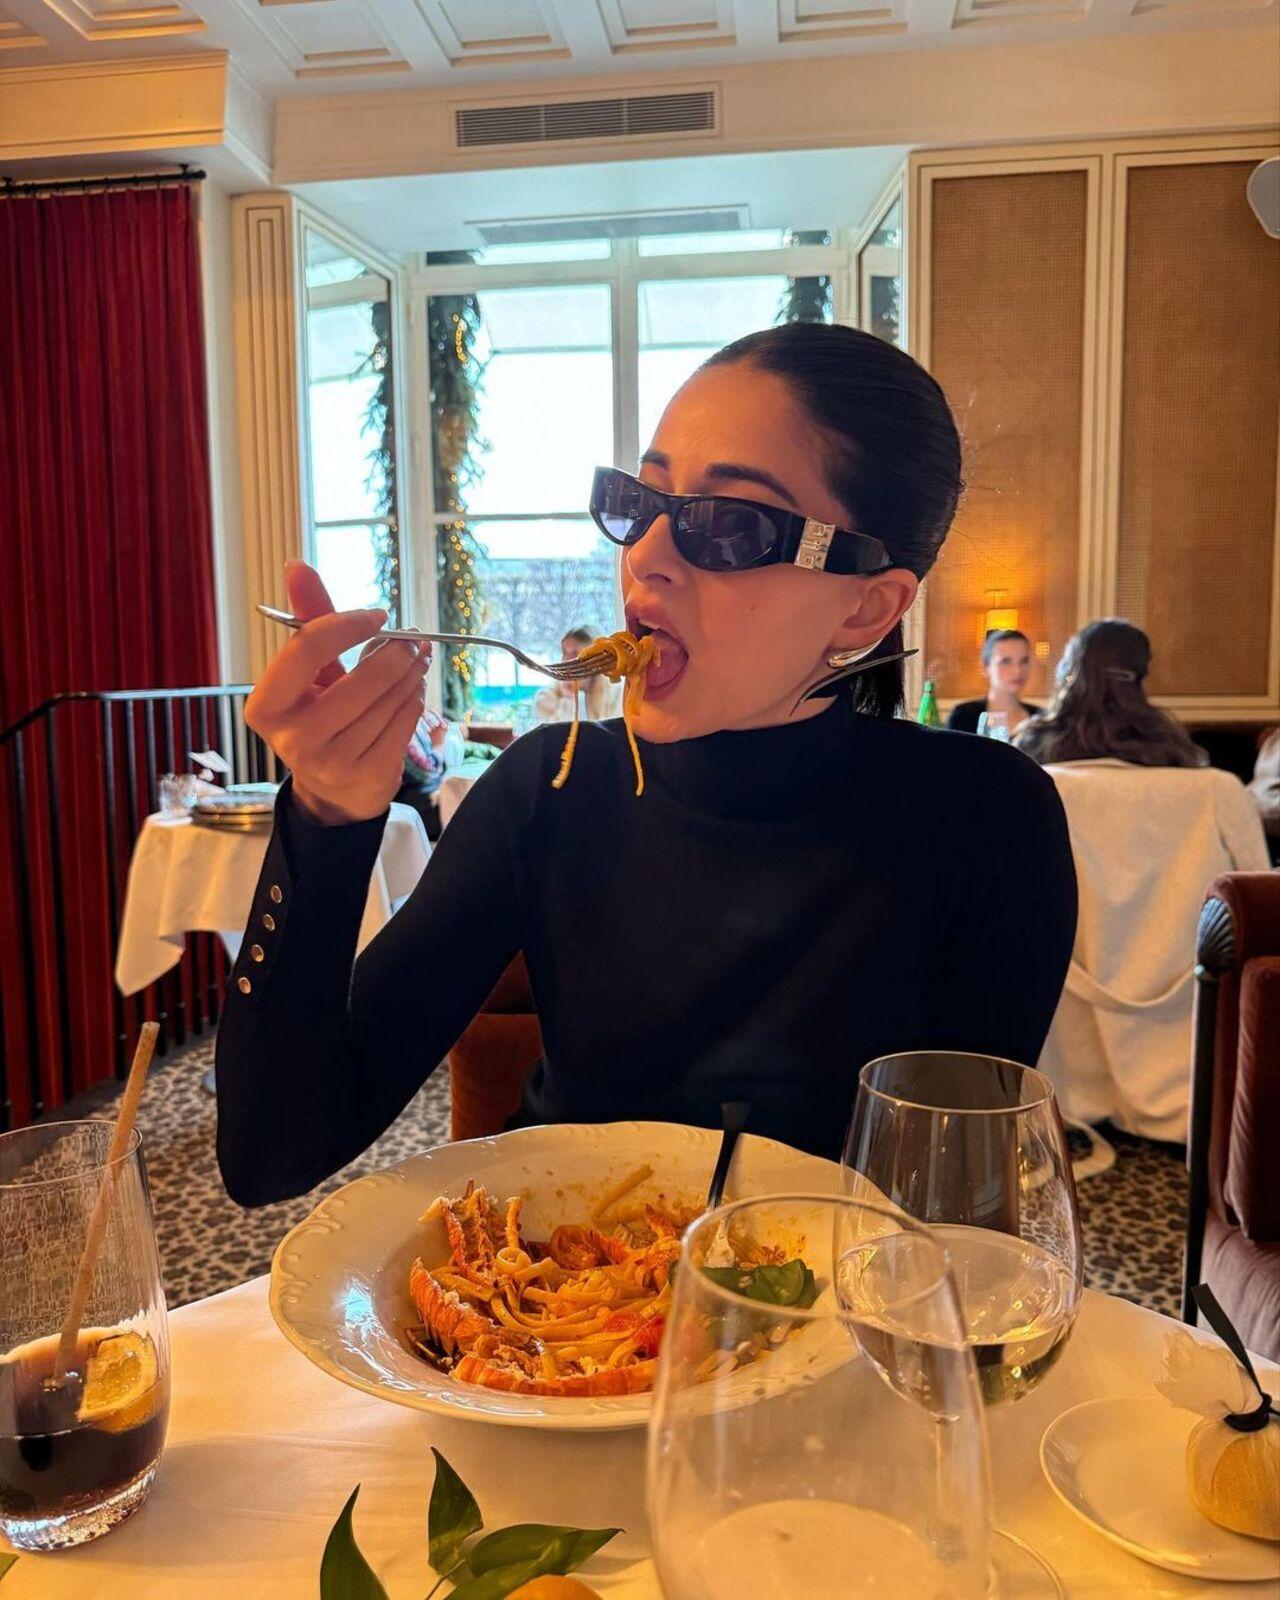 How can one land in Paris and not enjoy the local delicacies? Ananya enjoys a nice bowl of spaghetti while looking stylish in black outfit and striking sun glasses